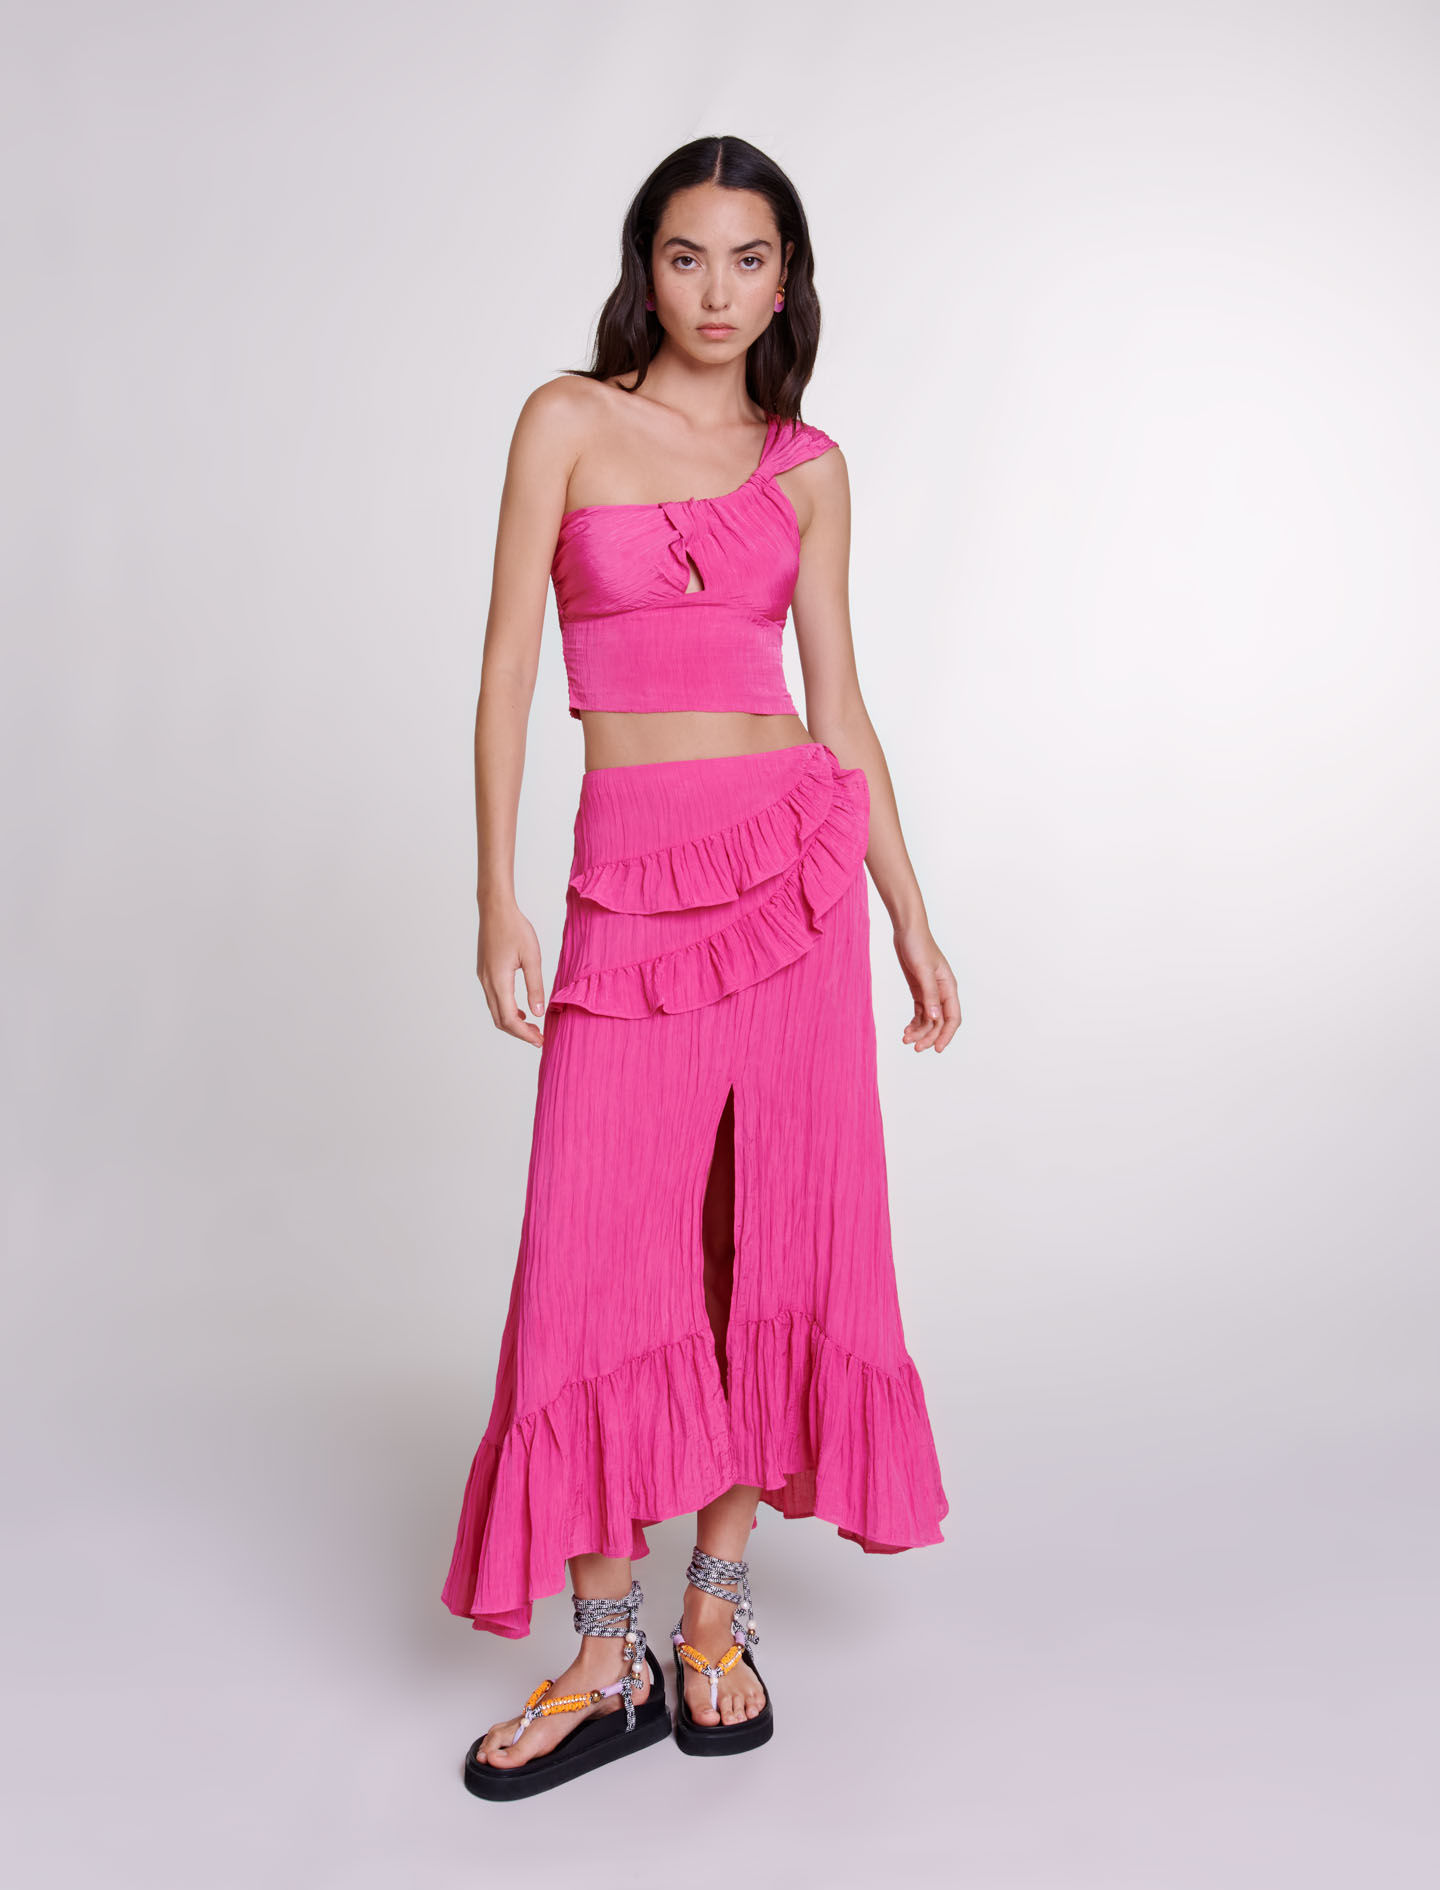 Maje Woman's polyester, Long satin-effect crinkle skirt for Spring/Summer, in color Fuchsia Pink /